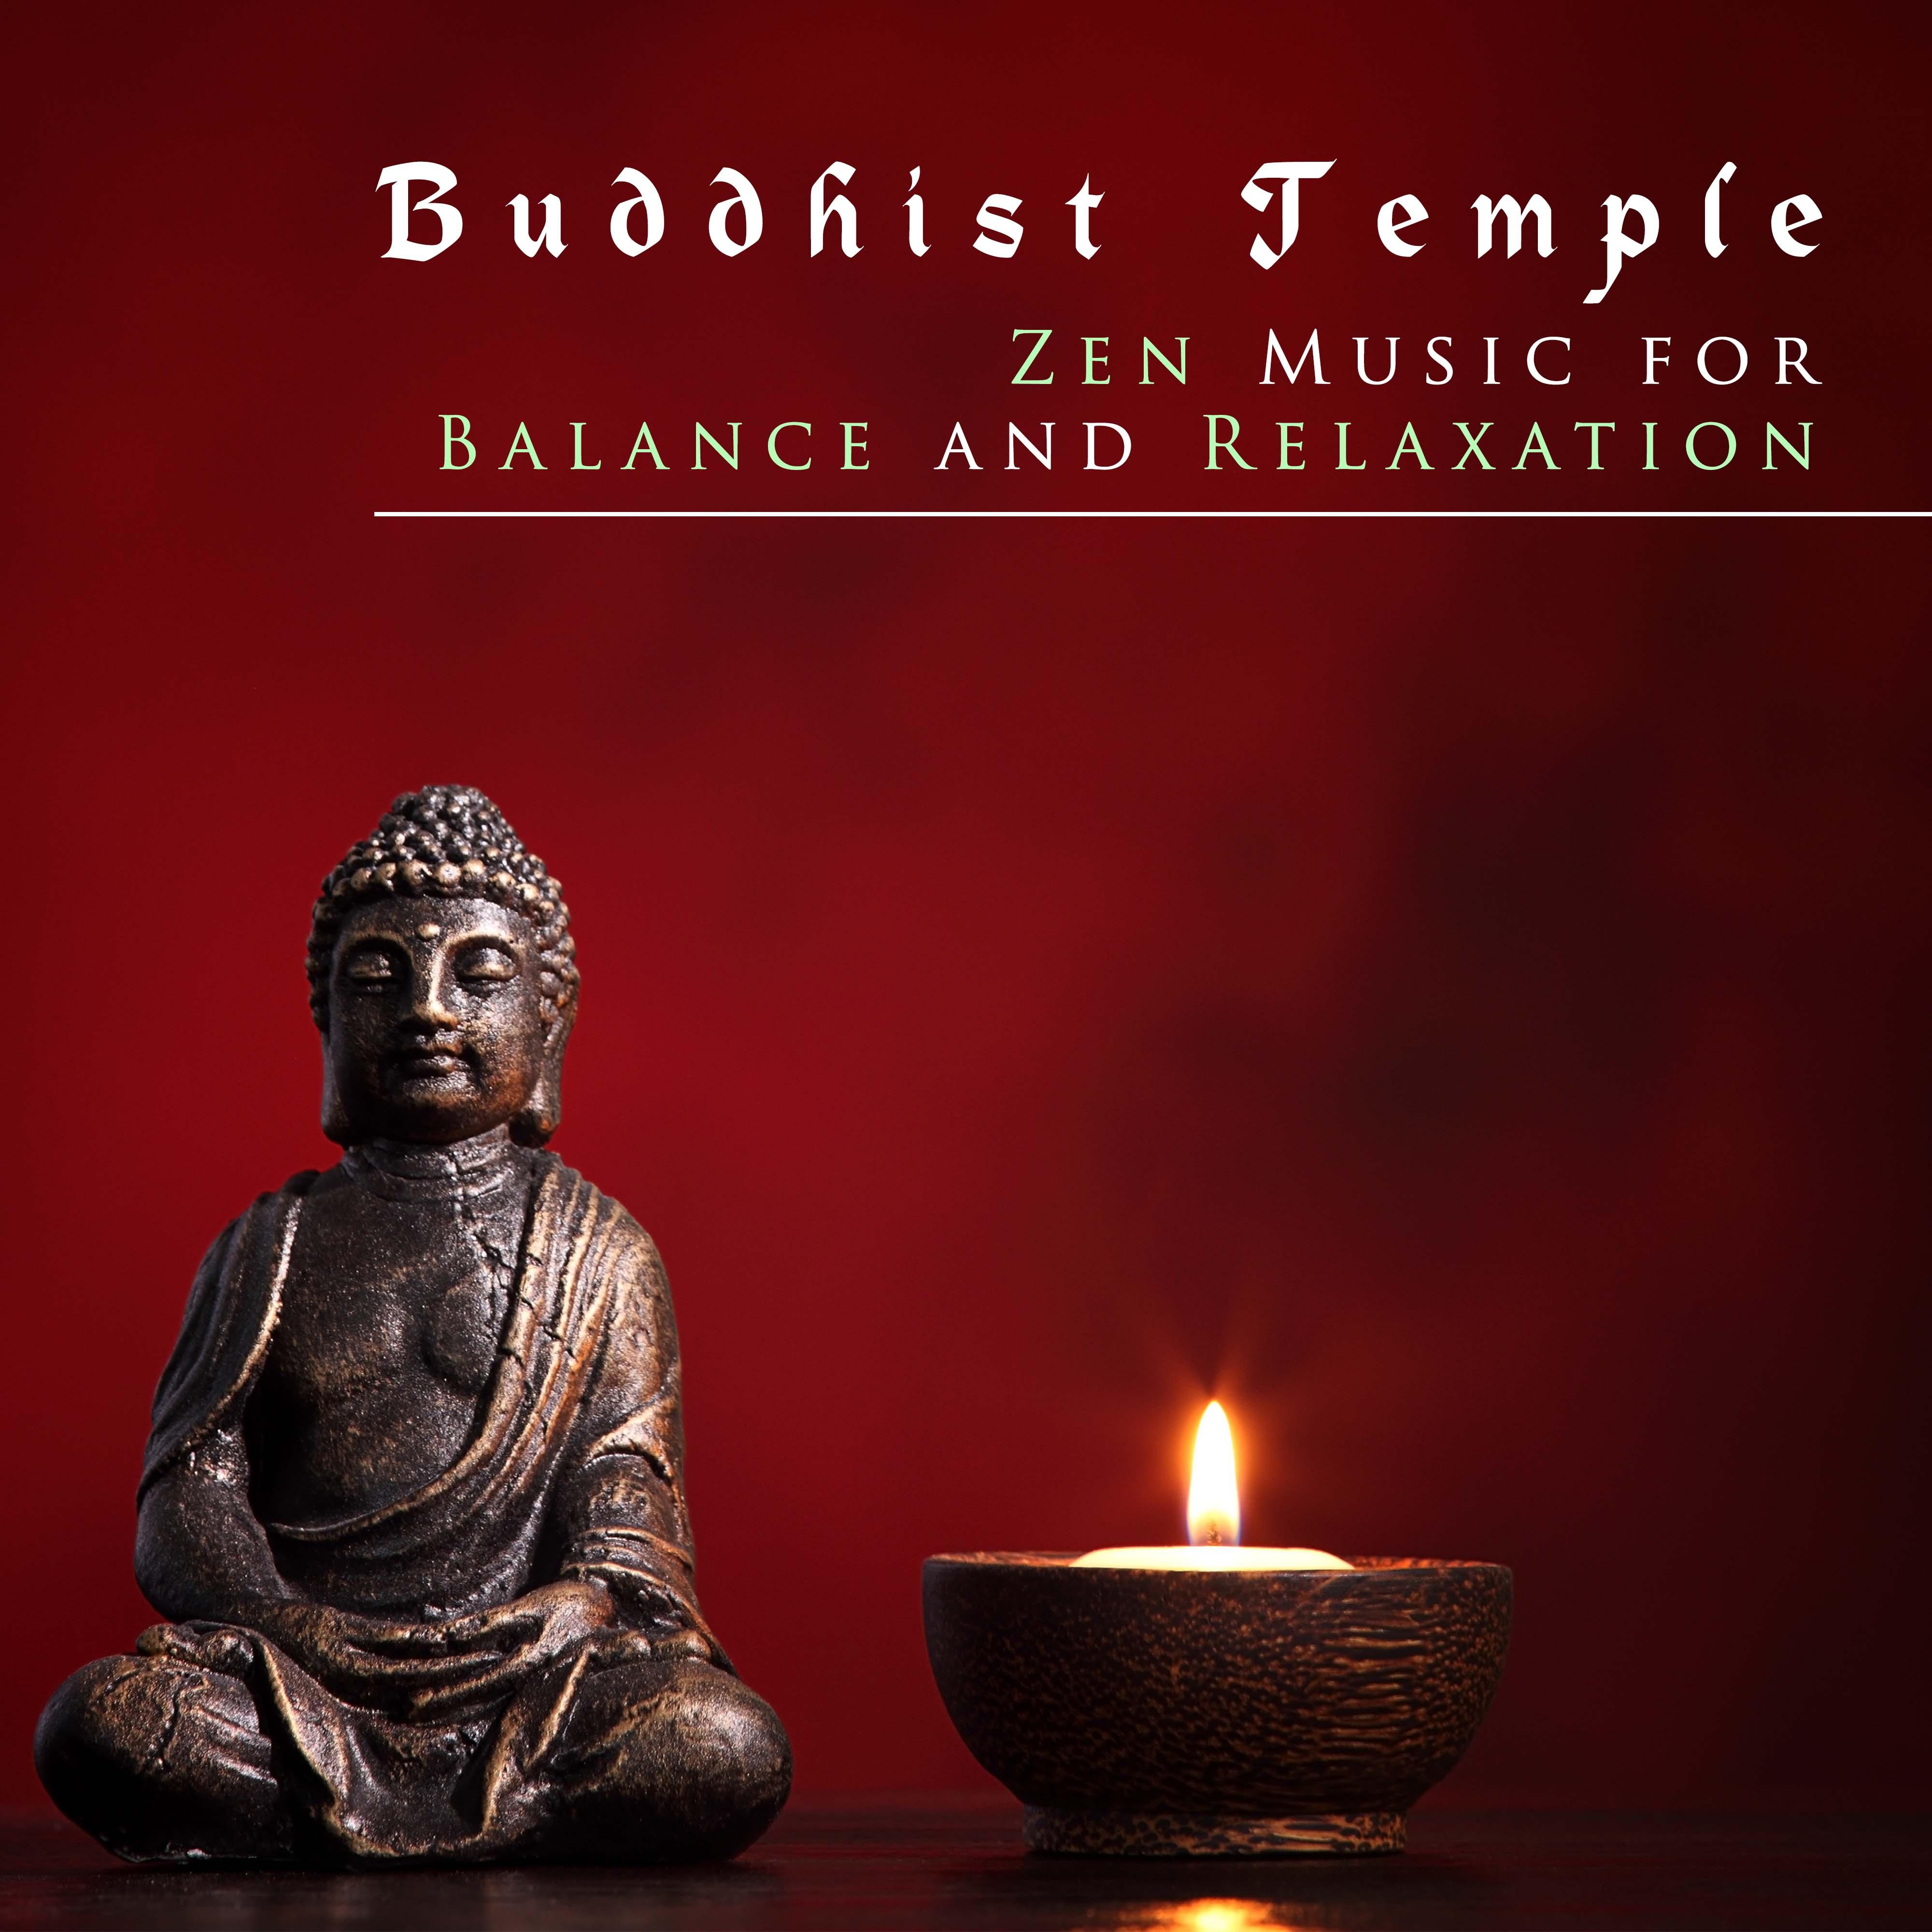 Buddhist Temple - Zen Music for Balance and Relaxation